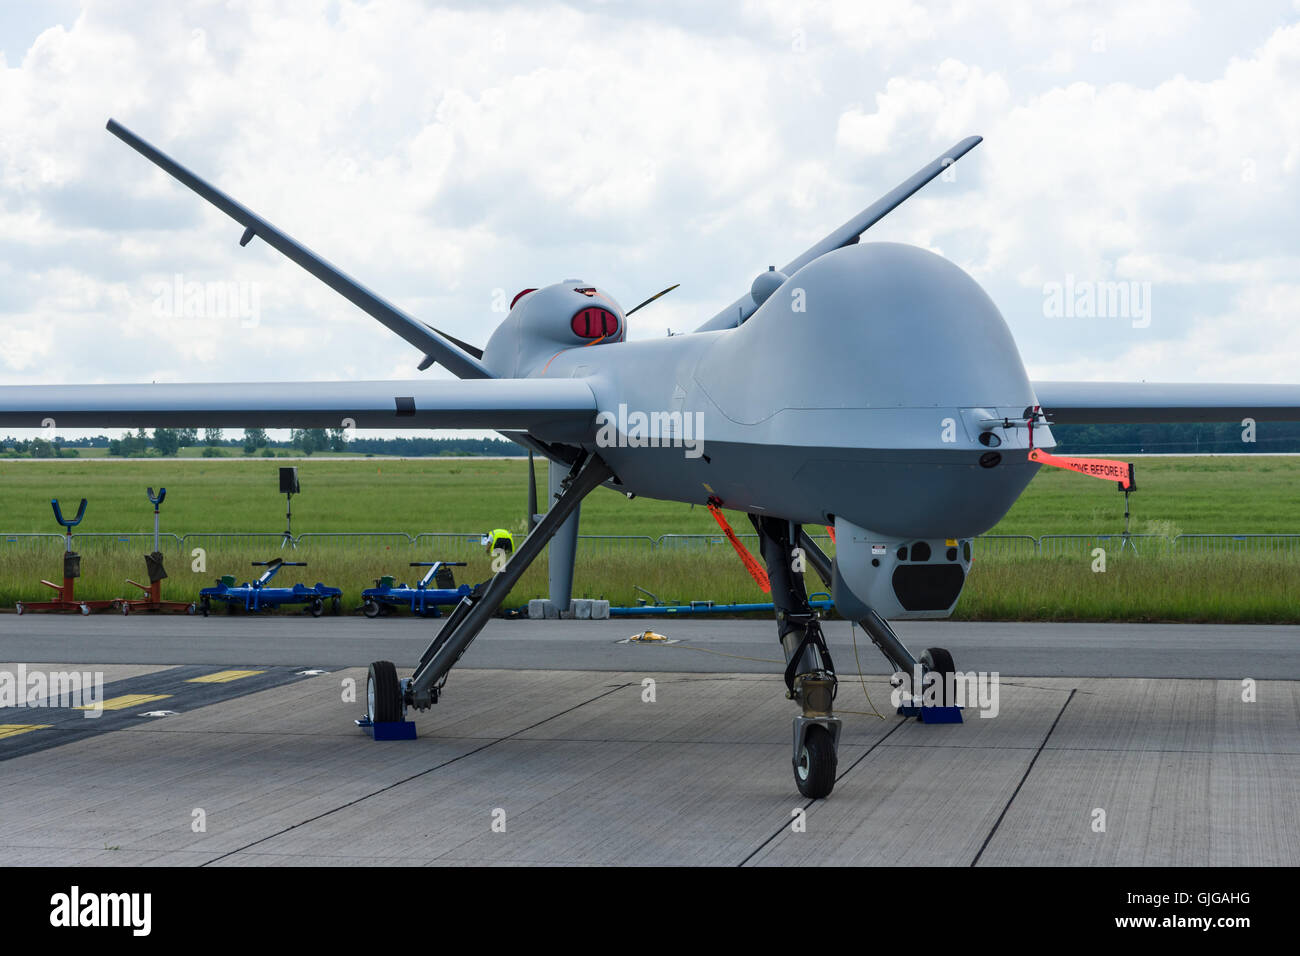 Unmanned combat air vehicle General Atomics MQ-9 Reaper. US Air Force. Exhibition ILA Berlin Air Show 2016 Stock Photo